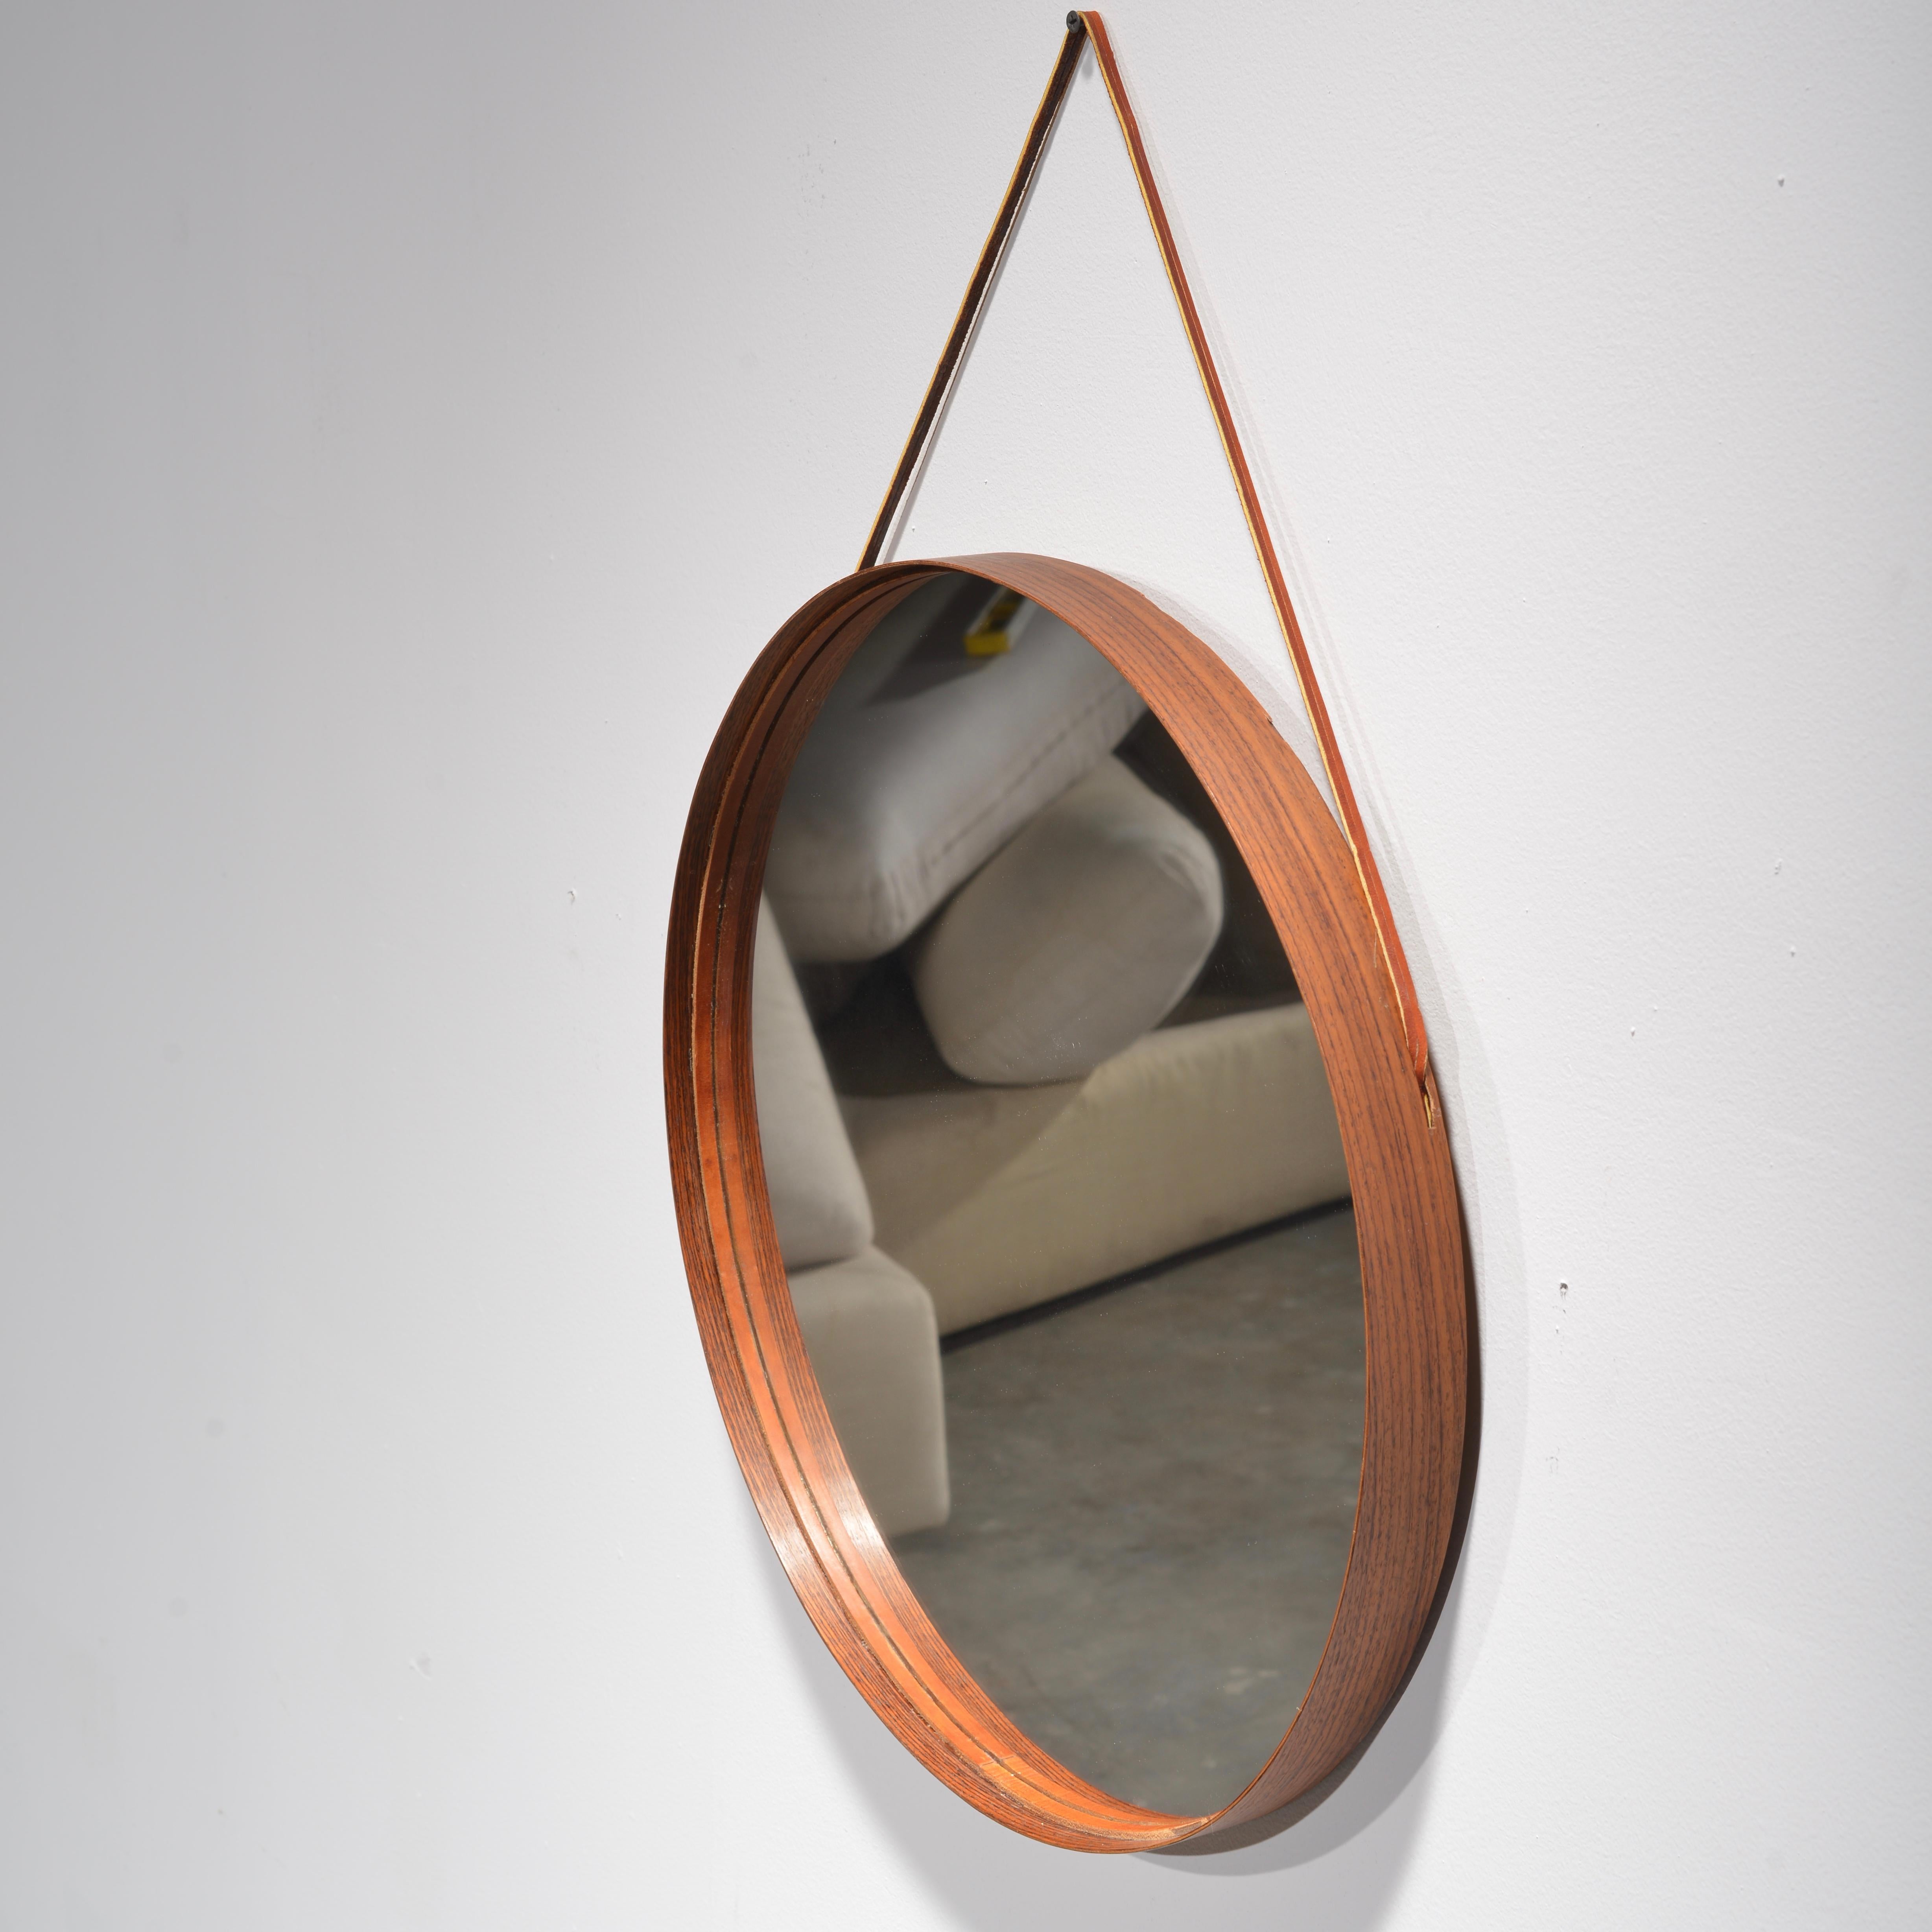 Scandinavian Modern Mirror in Rosewood and Leather by Uno & Osten Kristiansson for Glas Mäster  For Sale